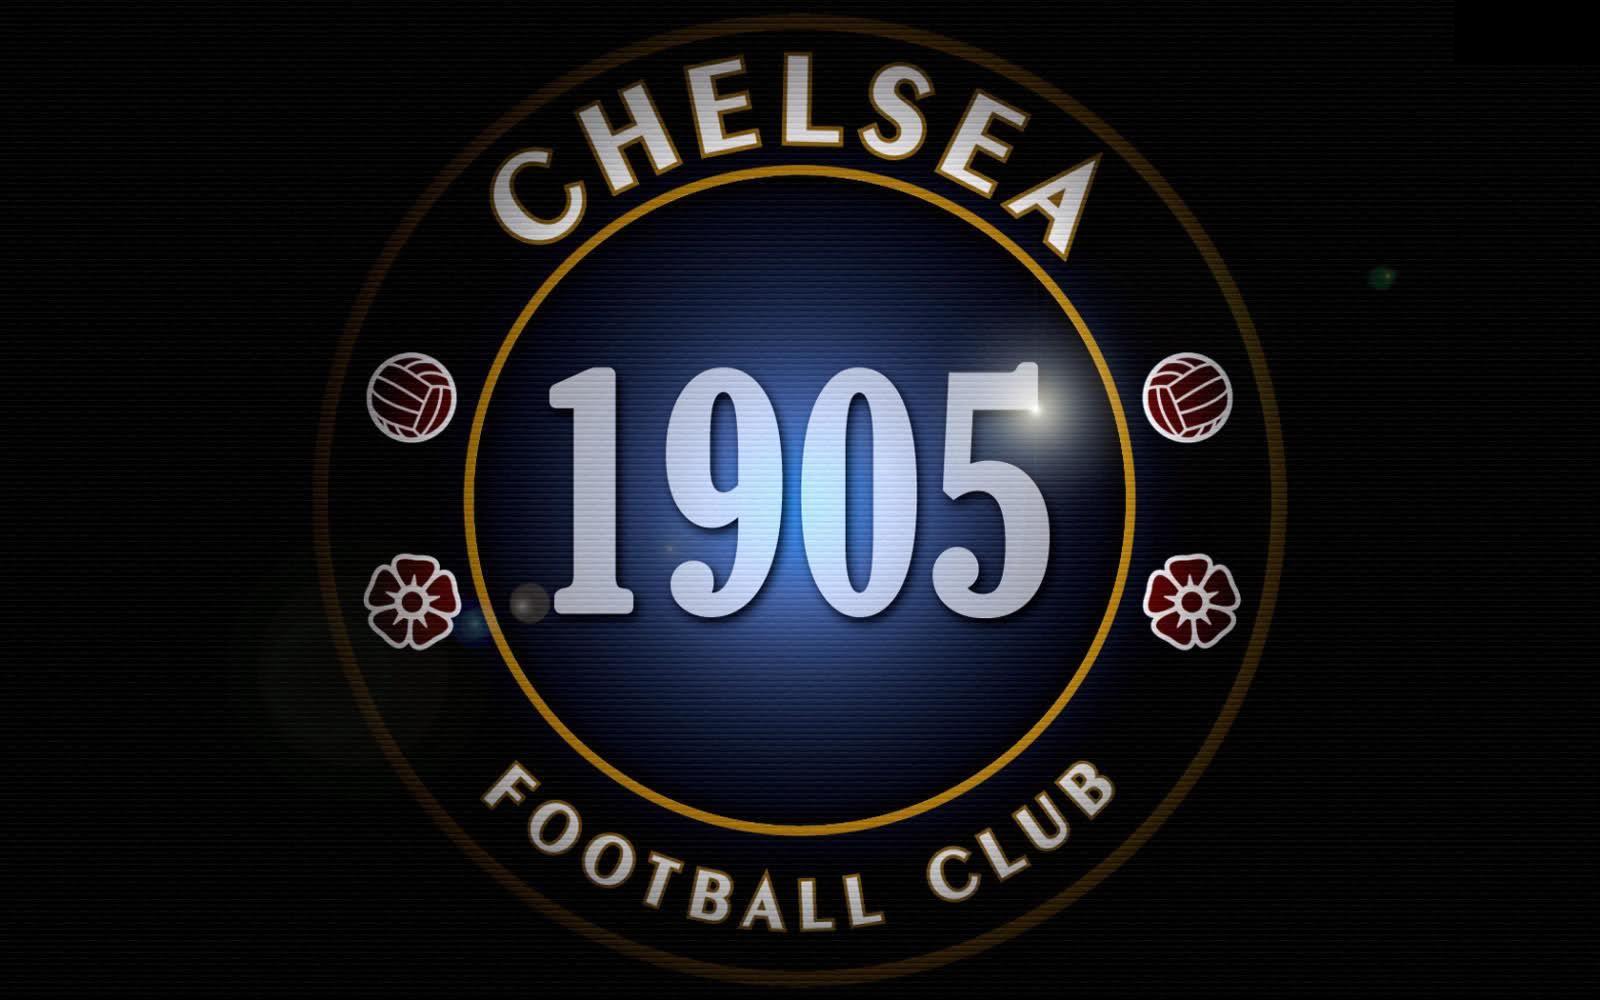 Cool HD Logo - Cool chelsea fc hd logo wallpapers football team pictures Cool Sport ...